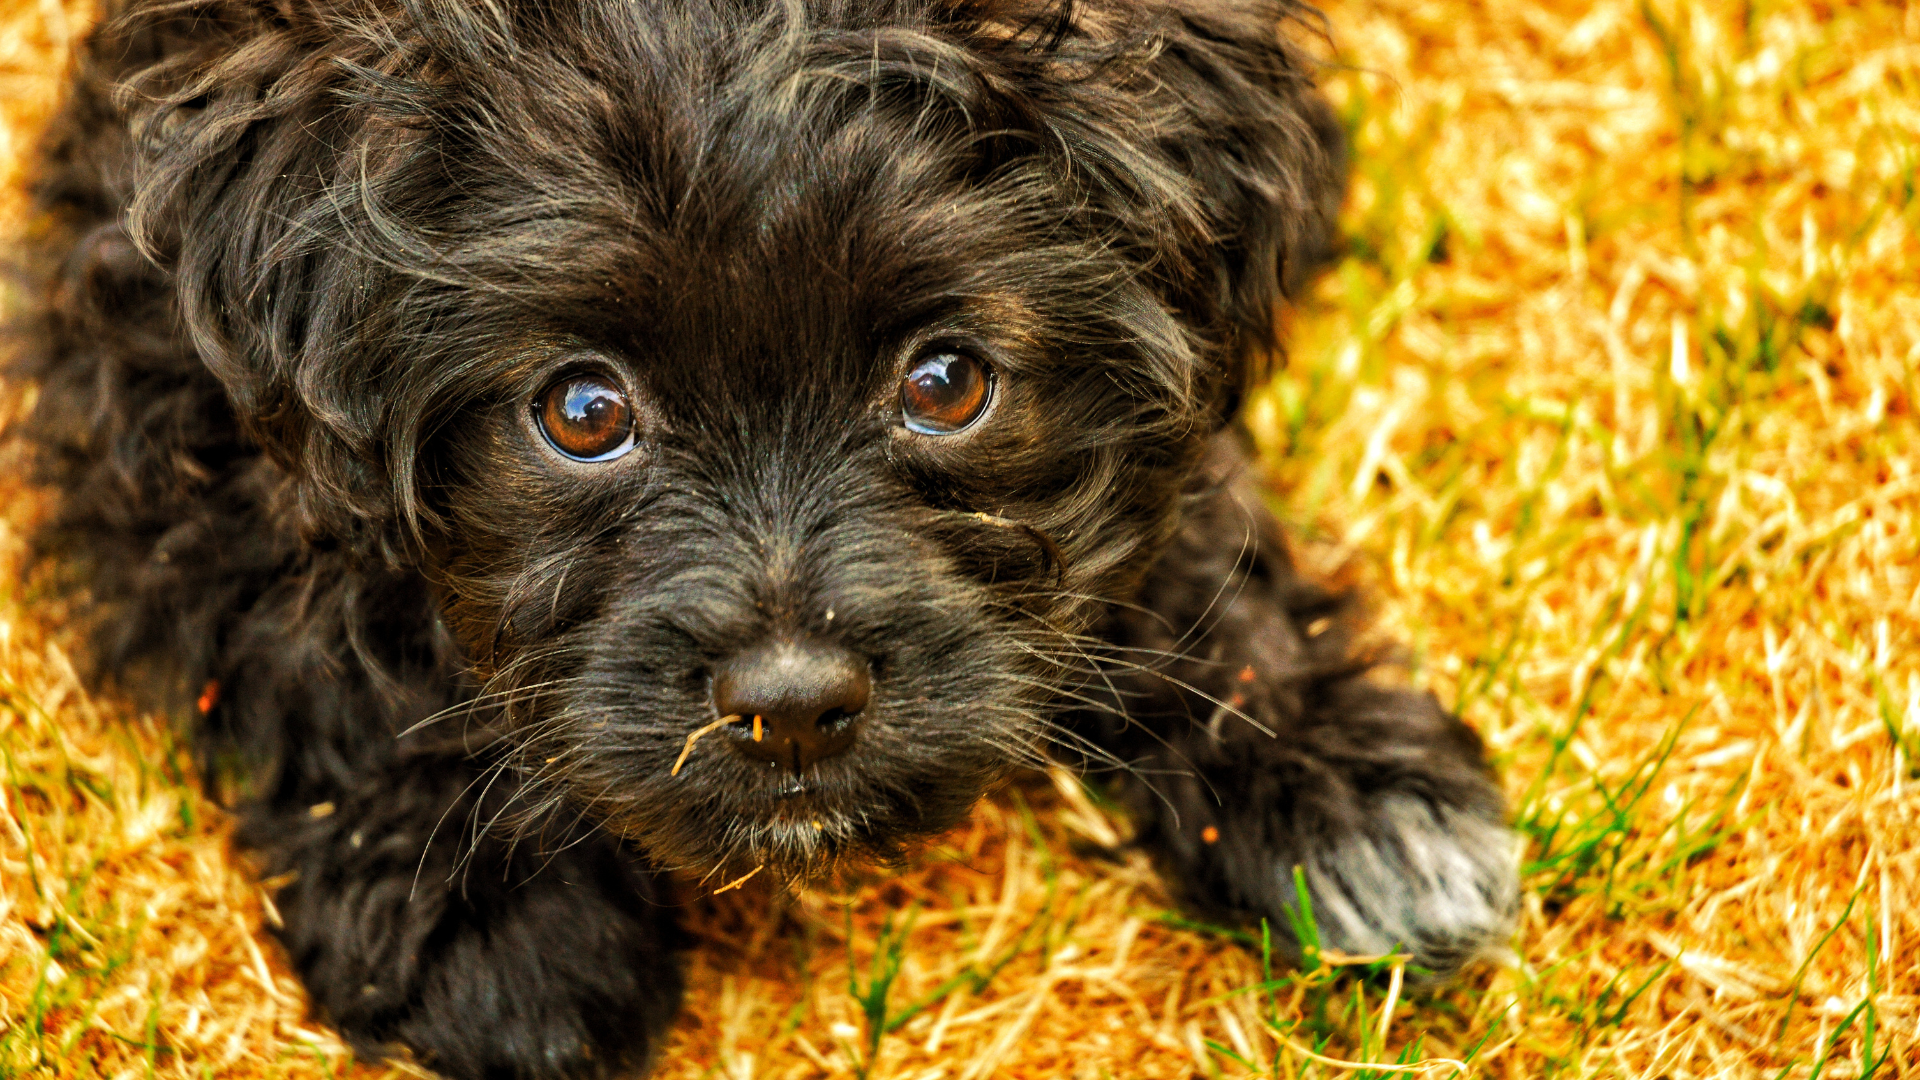 Best Collar for a Yorkipoo Puppy